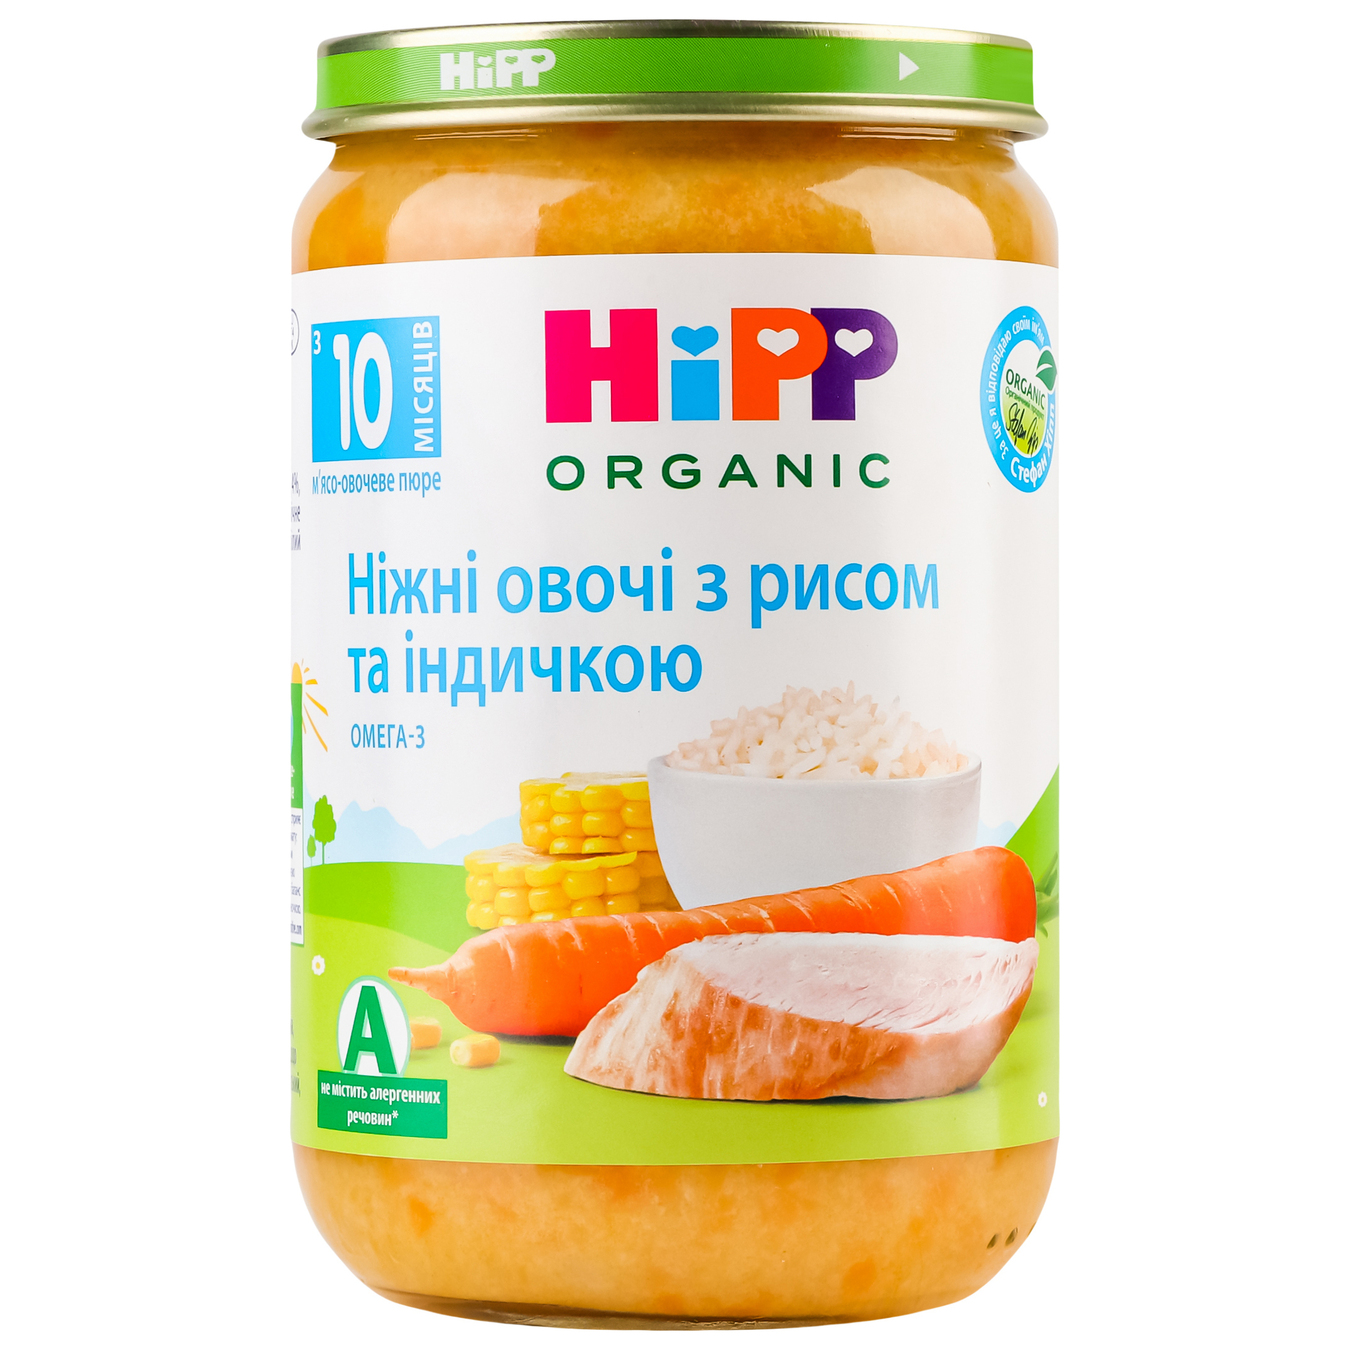 Baby puree HiPP Turkey in vegetables with rice for 12+ month old babies glass jar 220g Hungary